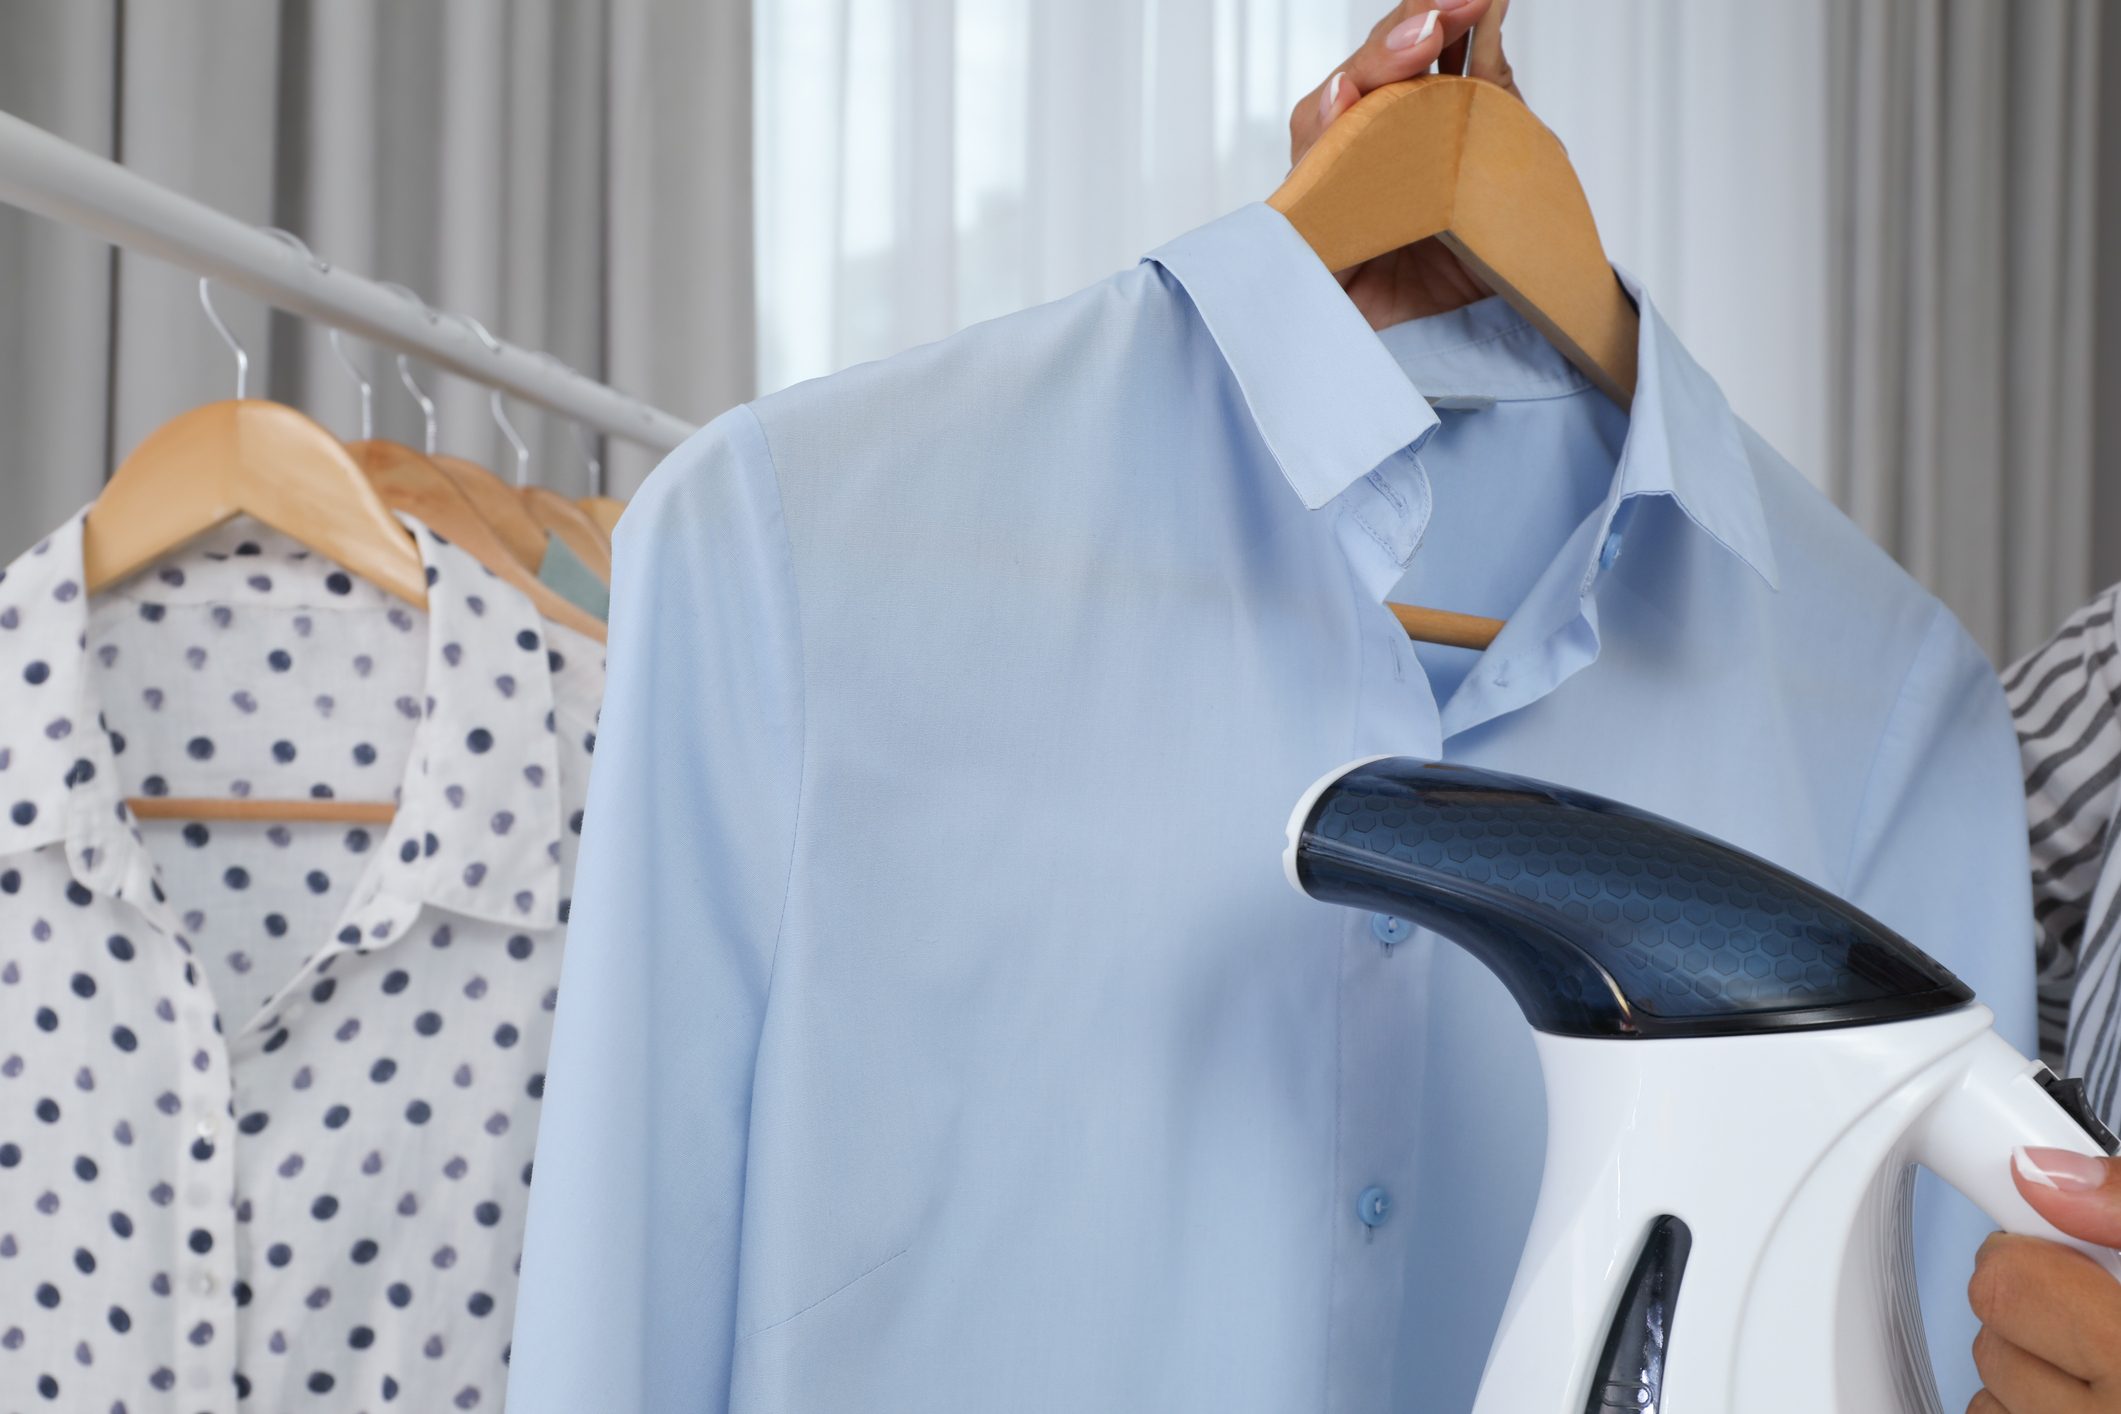 How to Use a Steamer on Clothes